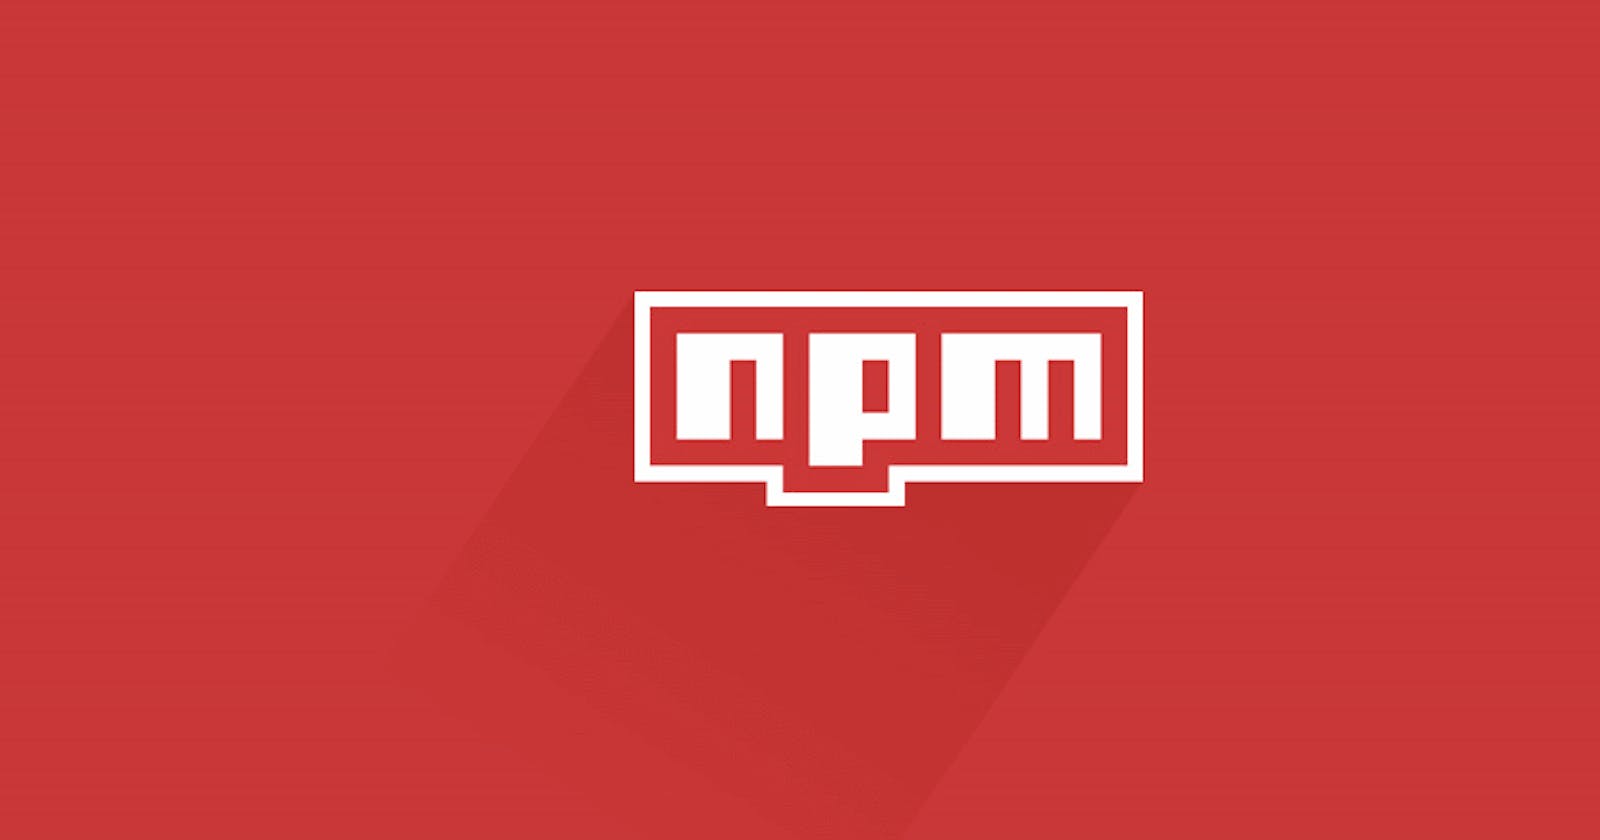 The right way of selecting an NPM library for your projects!